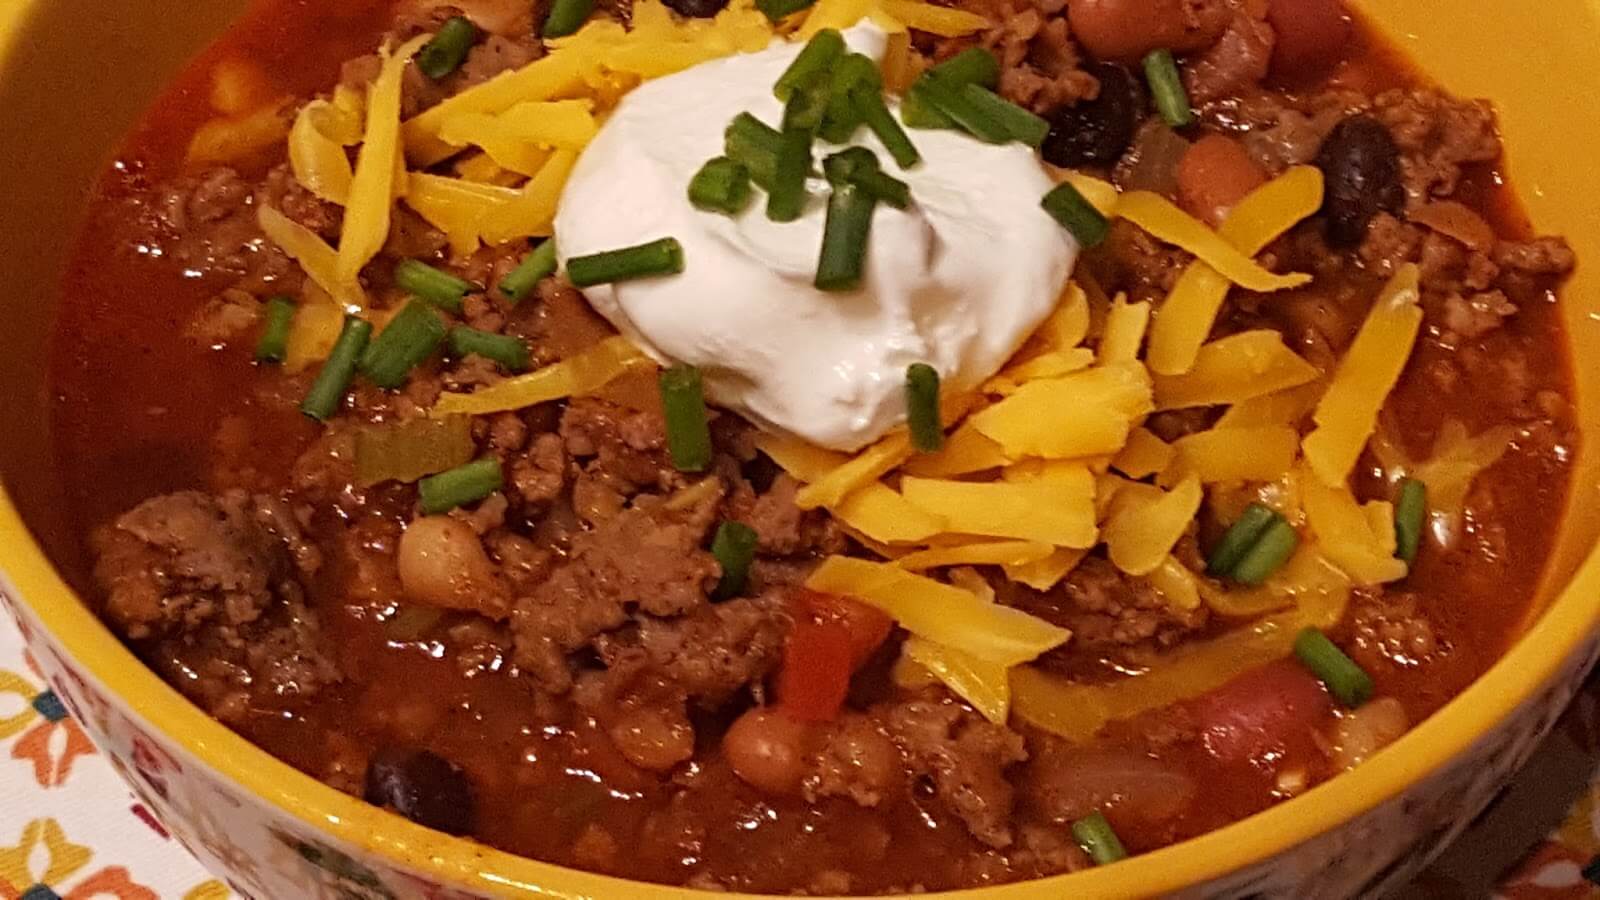 Bowl of Chili with sour cream and shredded cheese with chives on top